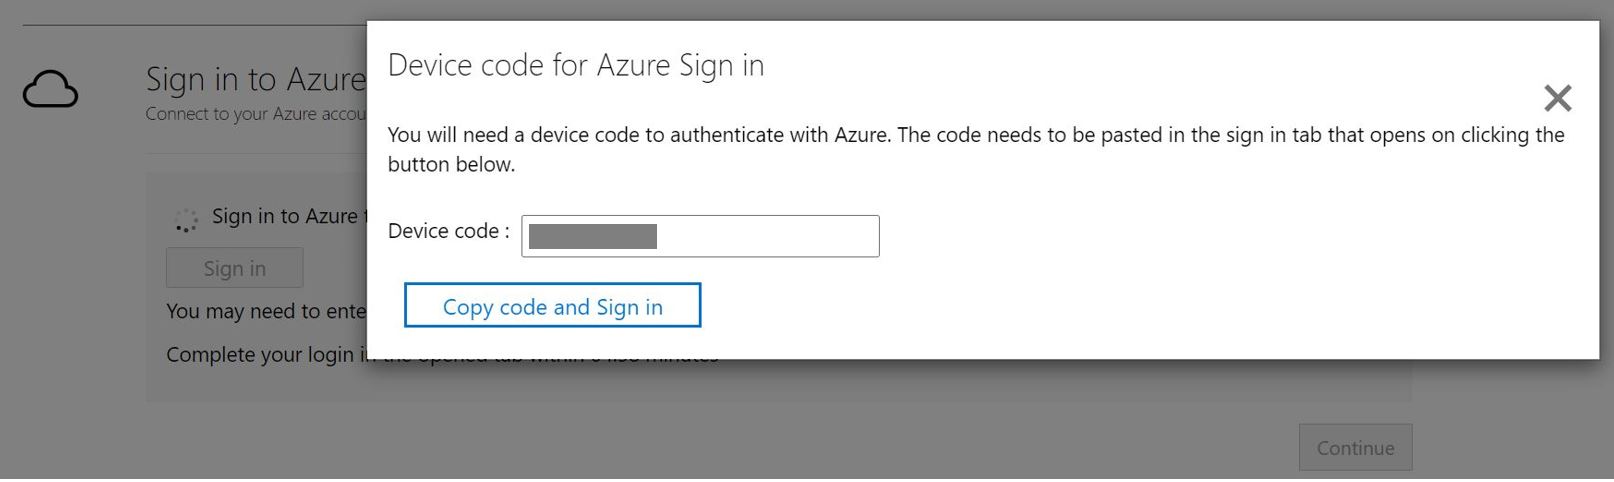 Screenshot that shows the Device code for Azure Sign in window.